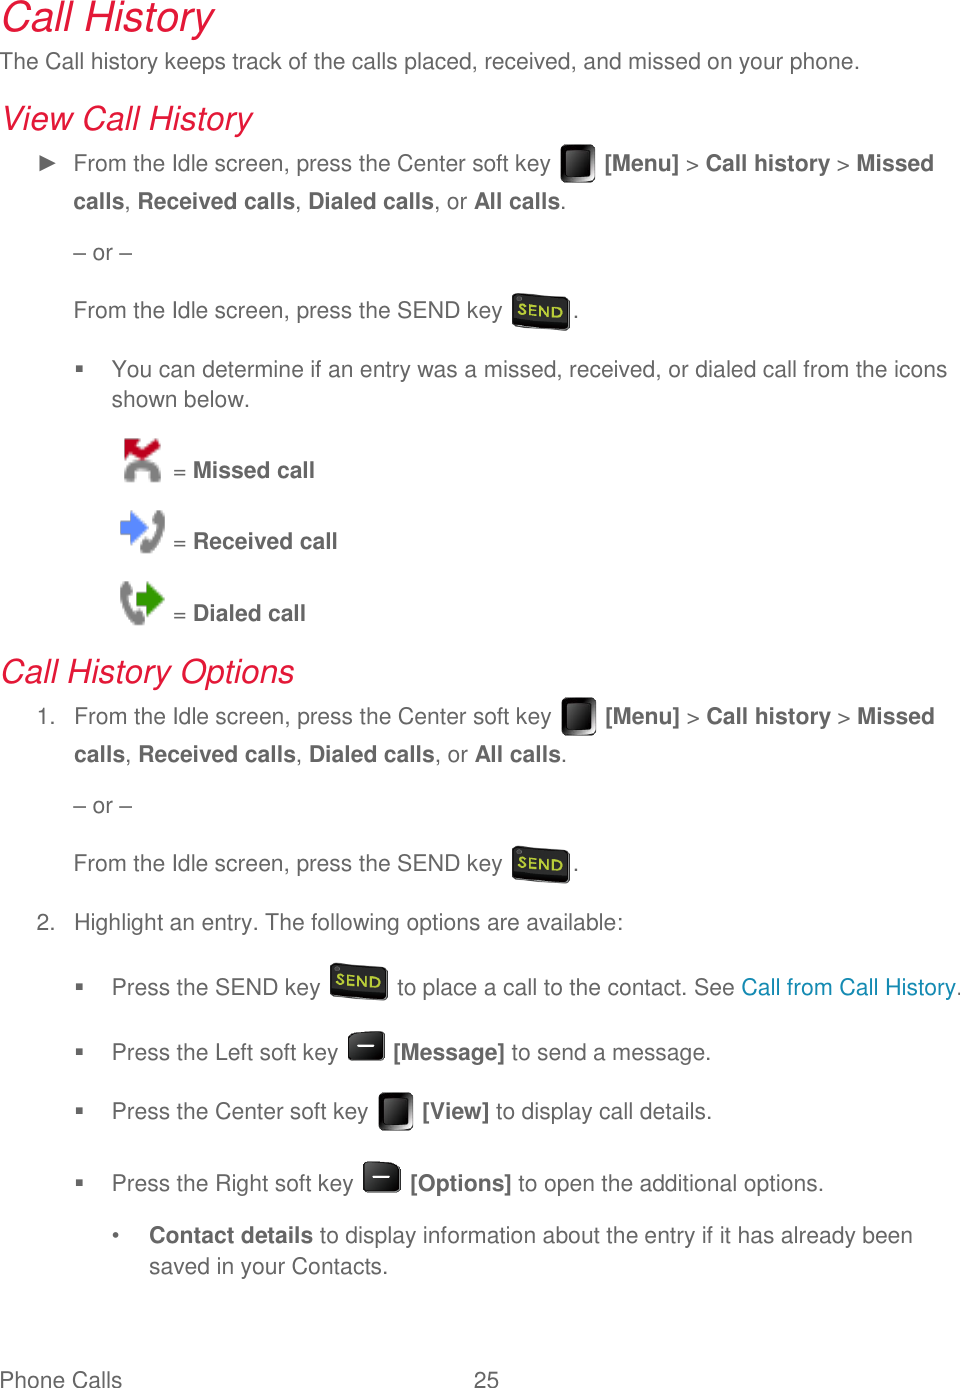 Phone Calls  25   Call History The Call history keeps track of the calls placed, received, and missed on your phone. View Call History ►  From the Idle screen, press the Center soft key   [Menu] &gt; Call history &gt; Missed calls, Received calls, Dialed calls, or All calls. – or – From the Idle screen, press the SEND key  .   You can determine if an entry was a missed, received, or dialed call from the icons shown below.  = Missed call  = Received call  = Dialed call Call History Options   From the Idle screen, press the Center soft key   [Menu] &gt; Call history &gt; Missed 1.calls, Received calls, Dialed calls, or All calls. – or – From the Idle screen, press the SEND key  .   Highlight an entry. The following options are available: 2.  Press the SEND key   to place a call to the contact. See Call from Call History.   Press the Left soft key   [Message] to send a message.   Press the Center soft key   [View] to display call details.   Press the Right soft key   [Options] to open the additional options. • Contact details to display information about the entry if it has already been saved in your Contacts. 